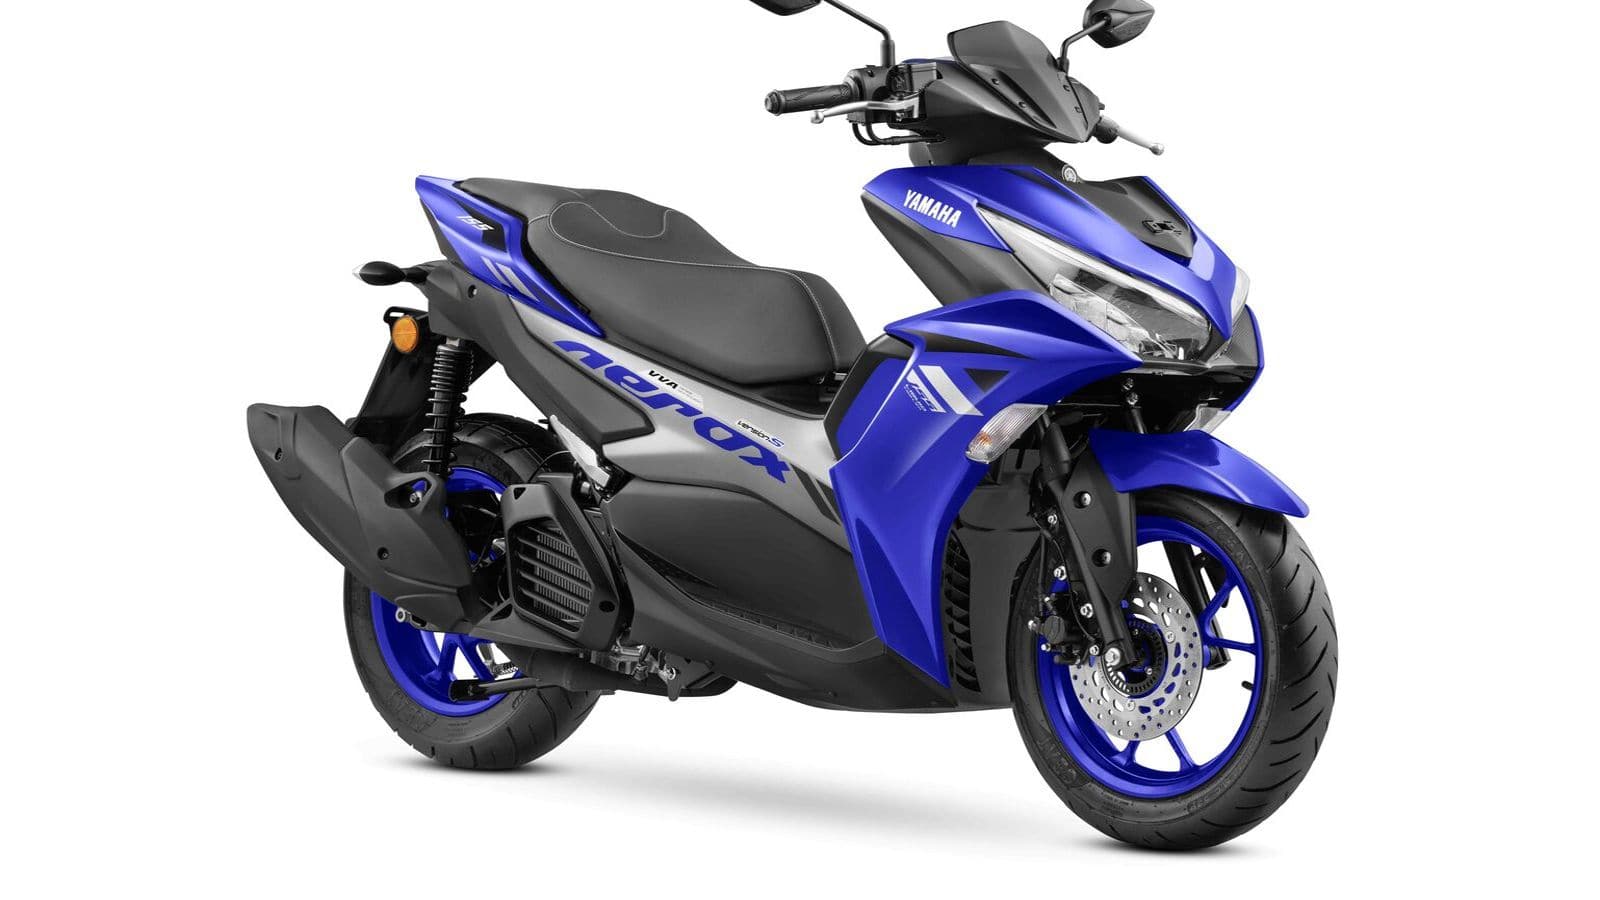 Yamaha India launches flagship scooter with traction control, keyless start